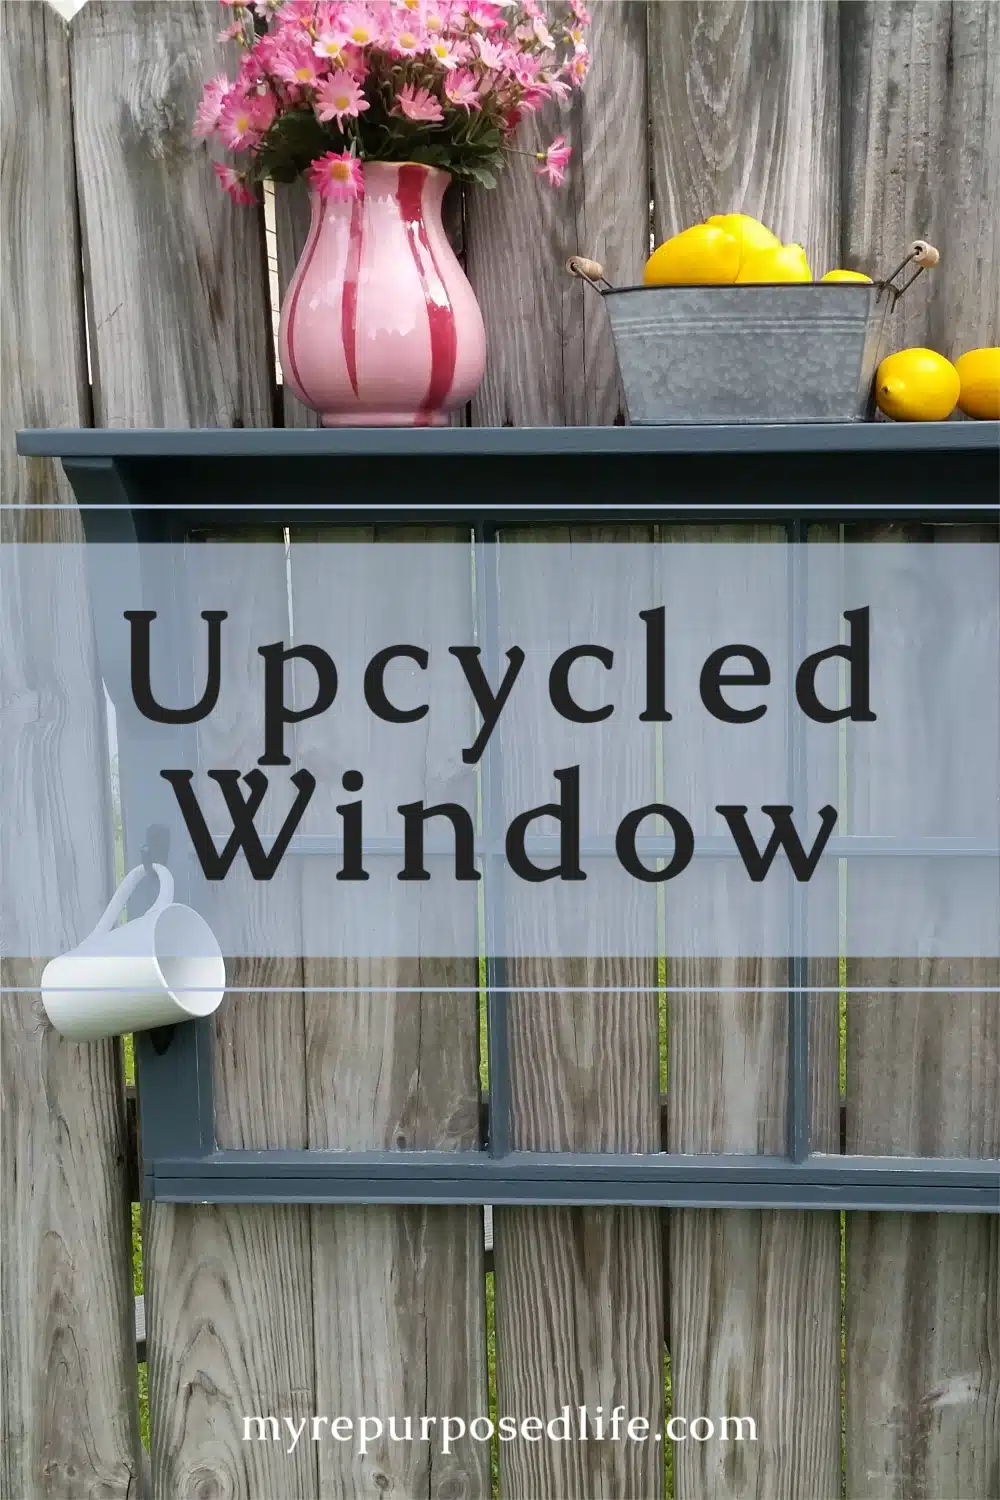 Step by step directions on how to repurpose a window by adding scrap wood pieces to turn it into a window shelf! Easy project to do in an afternoon. What color will you paint yours? #MyRepurposedLife #easy #window #project #repurposed #shelf #tutorial via @repurposedlife